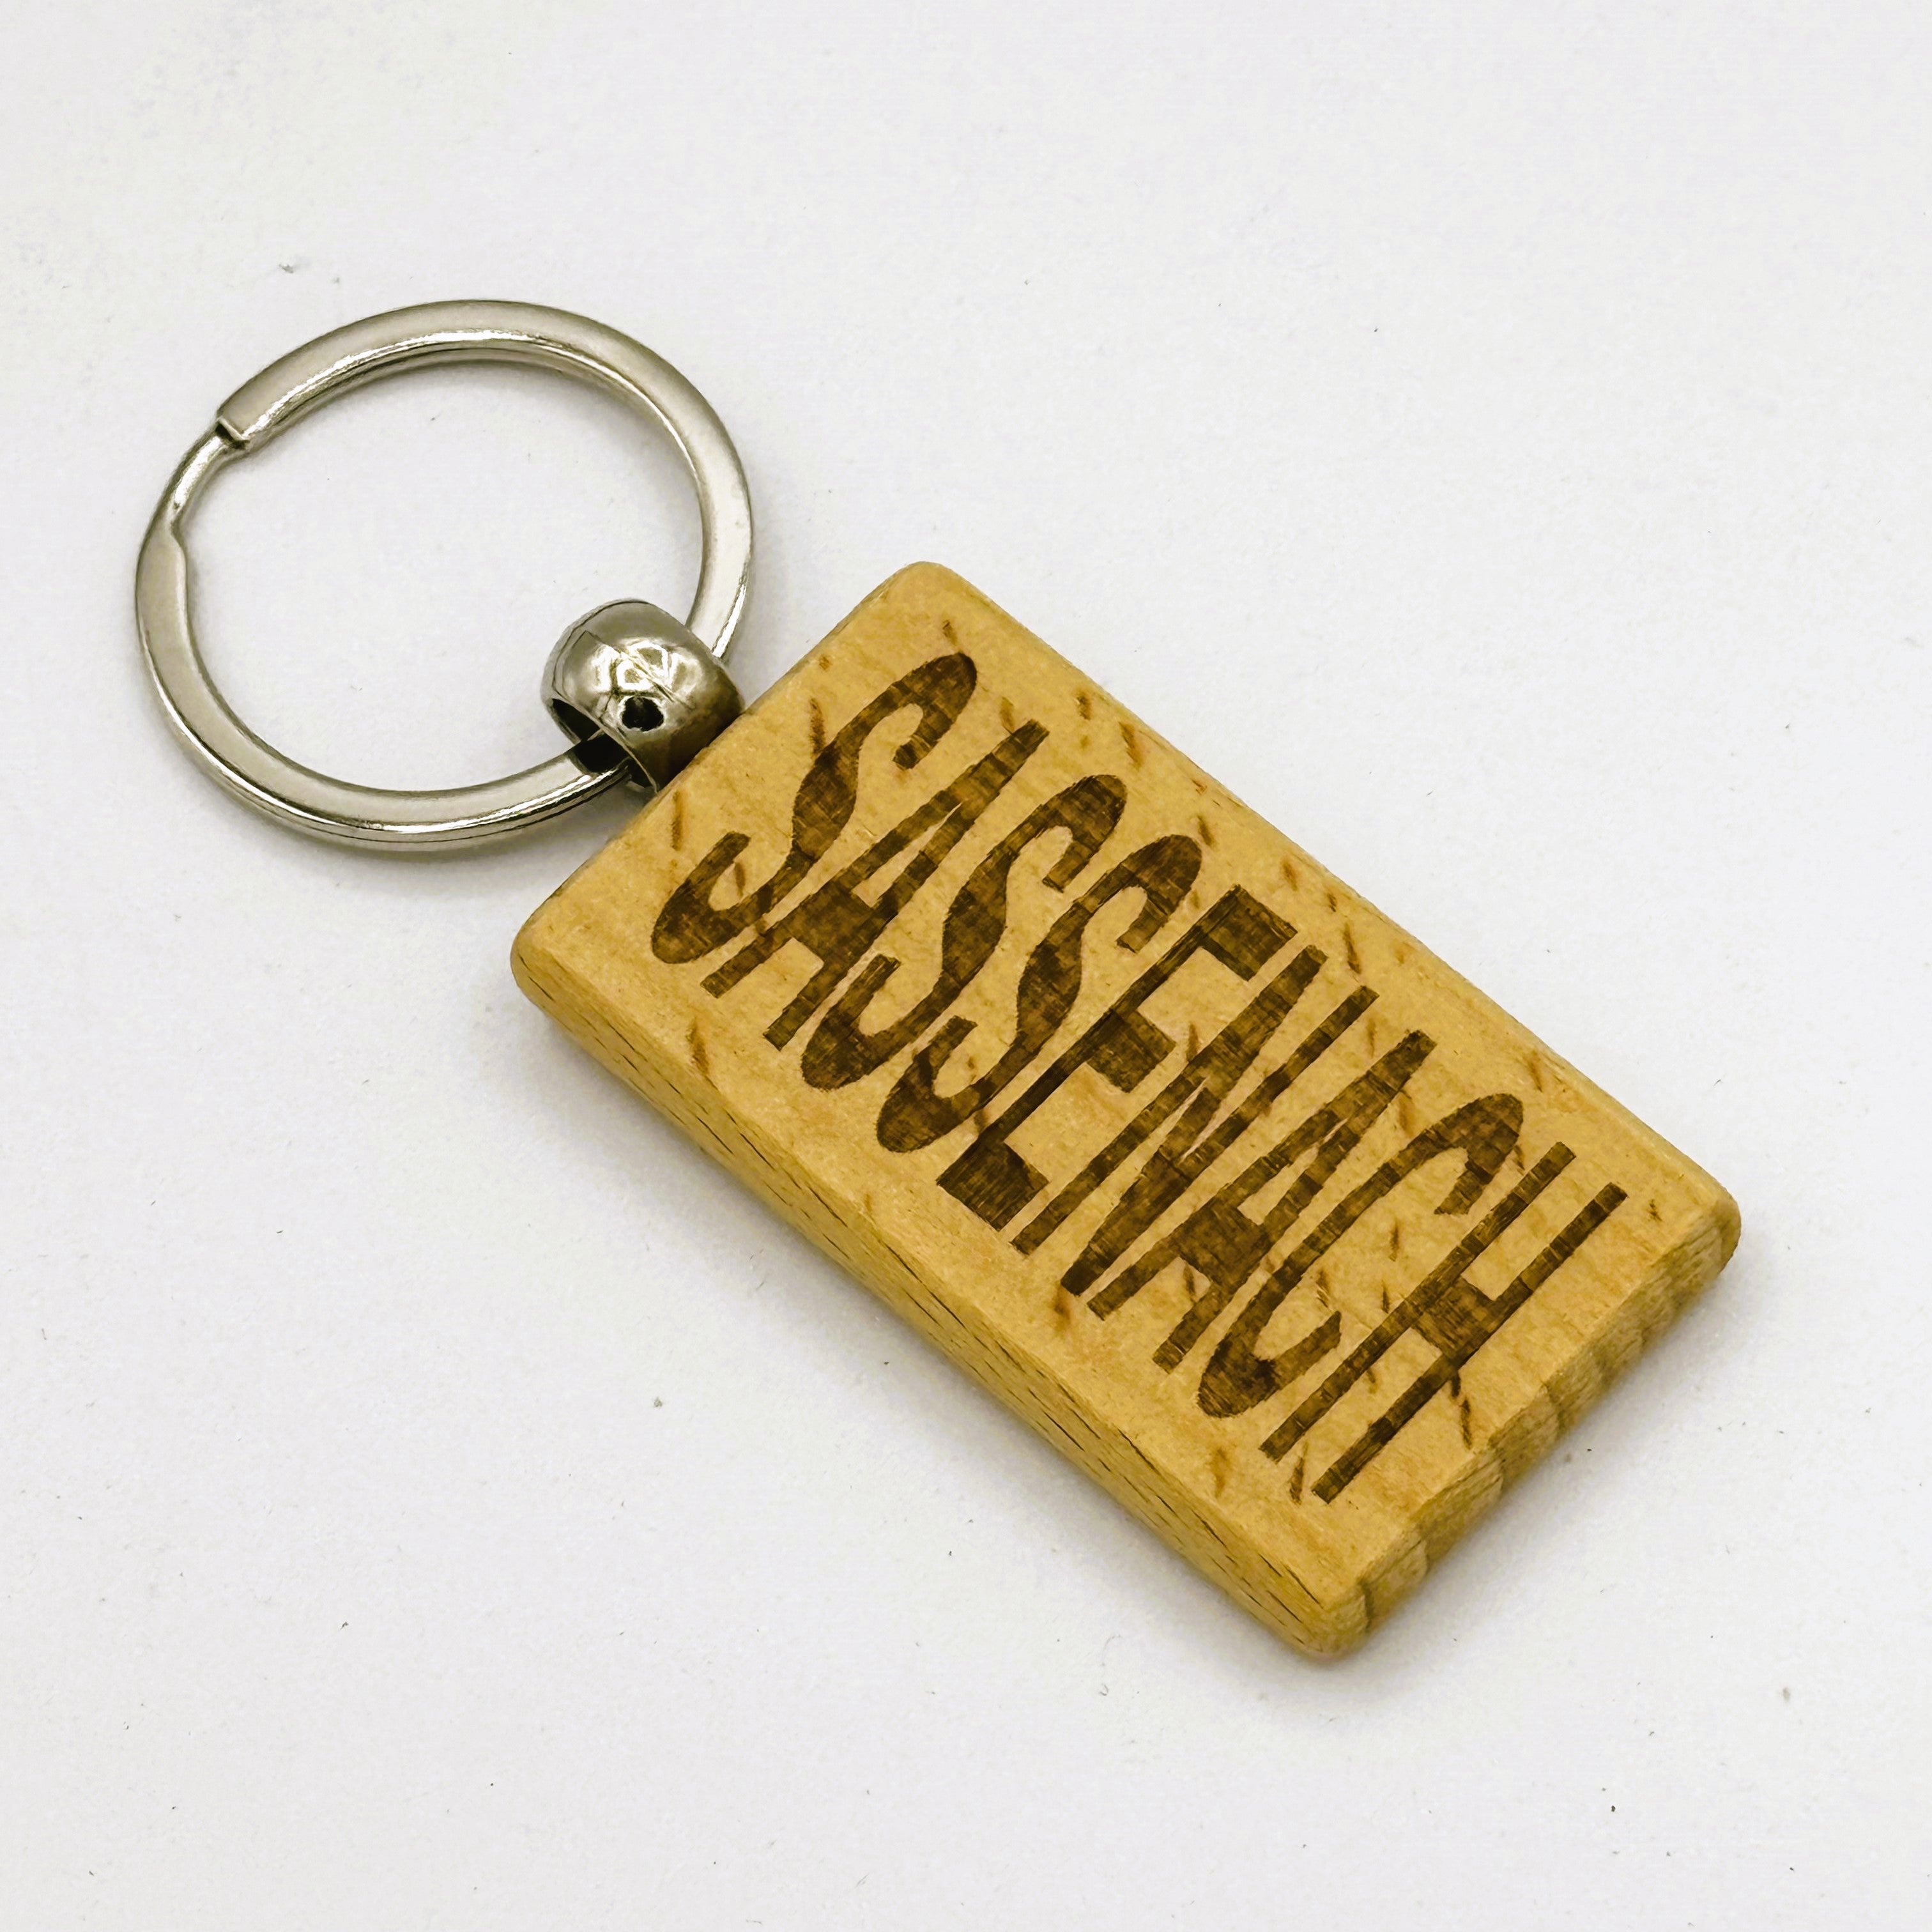 Wooden keyring laser engraved with Scottish dialect sassenach